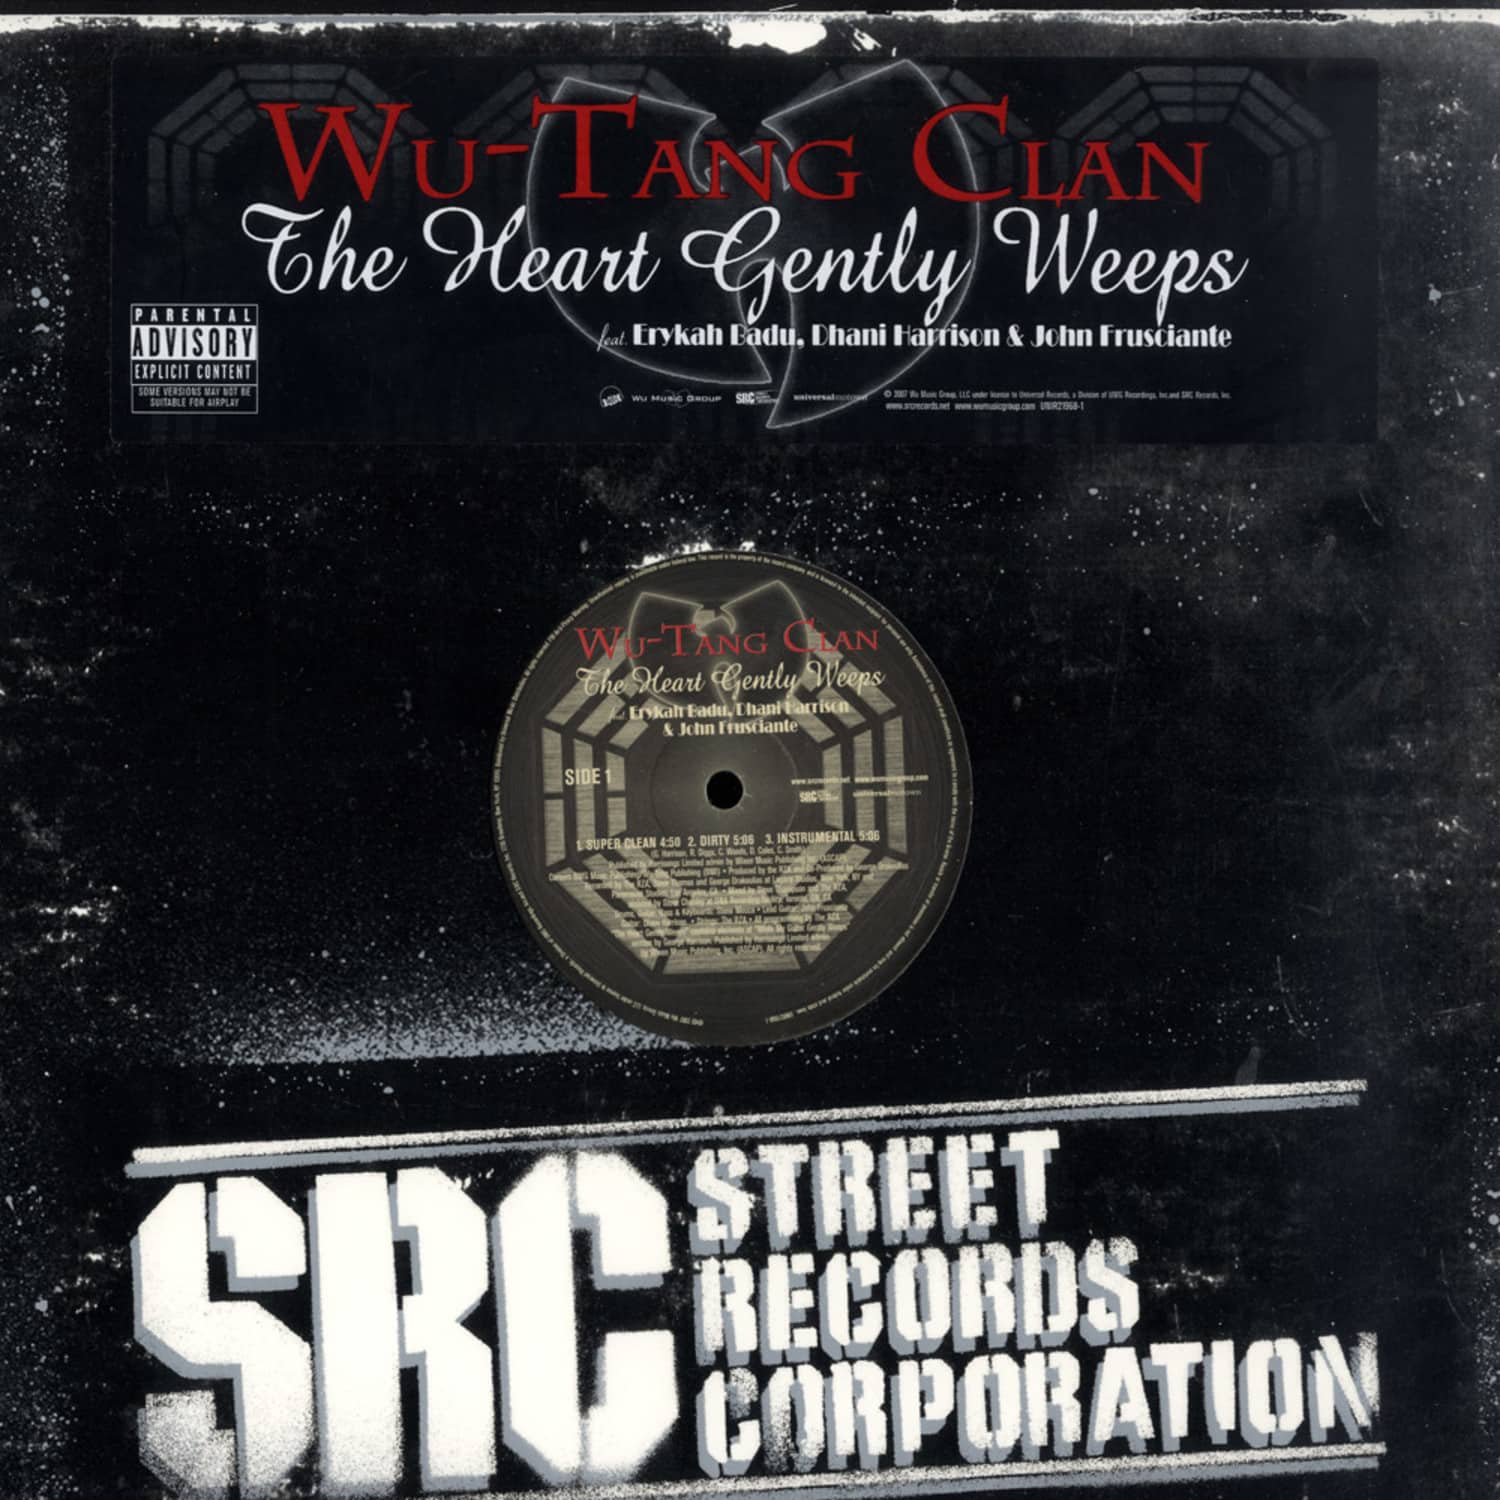 Wu-Tang Clan - The Heart Gently Weeps